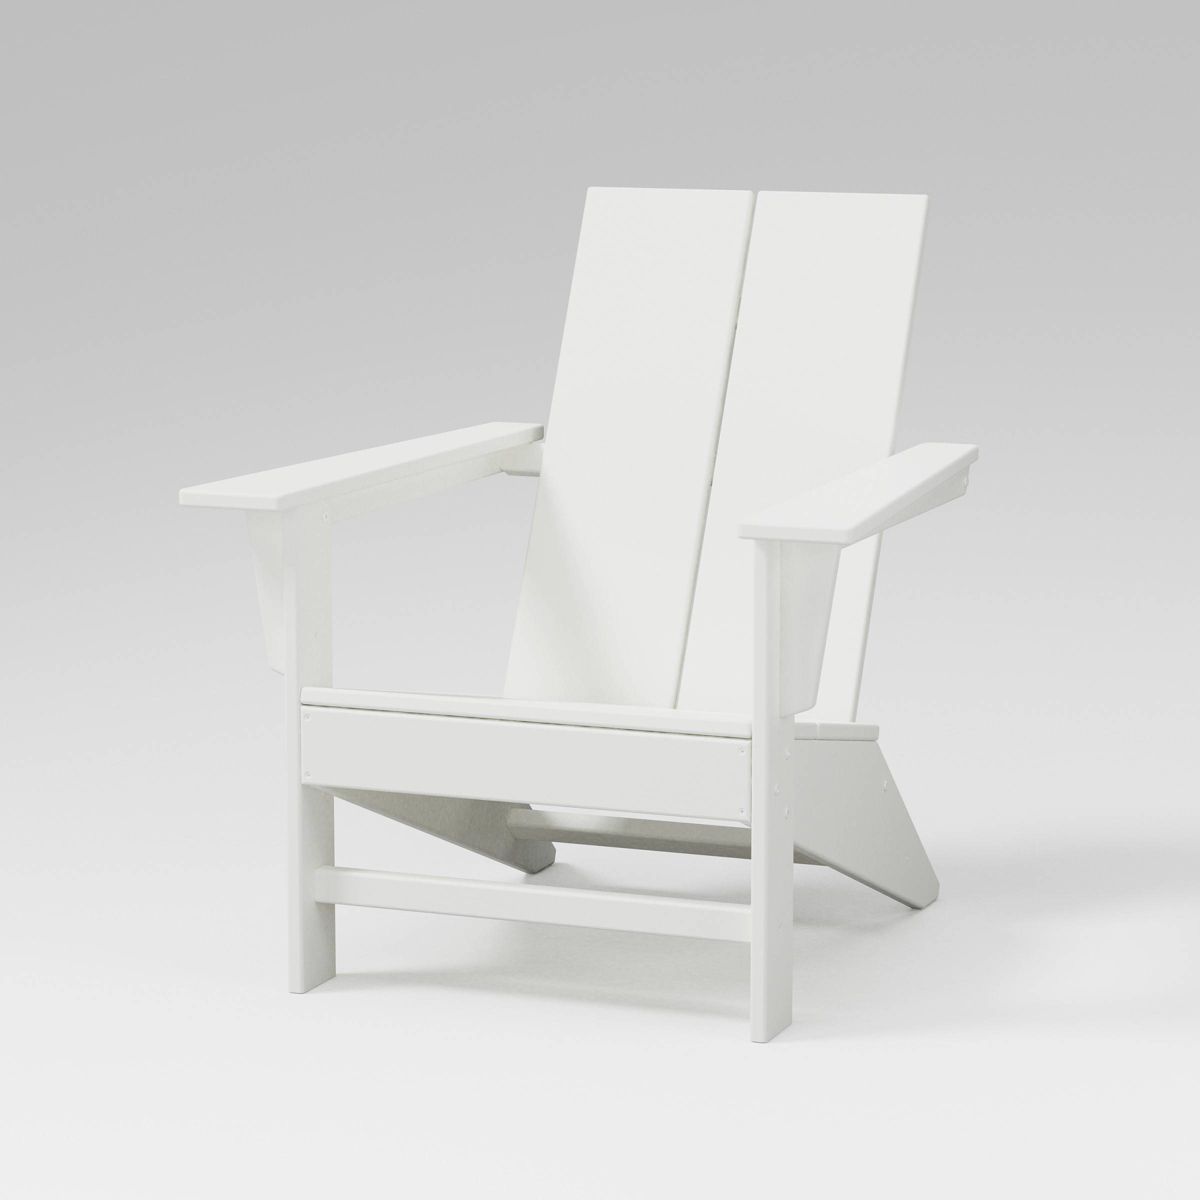 Moore POLYWOOD Outdoor Patio Chair, Adirondack Chair White - Threshold™ | Target